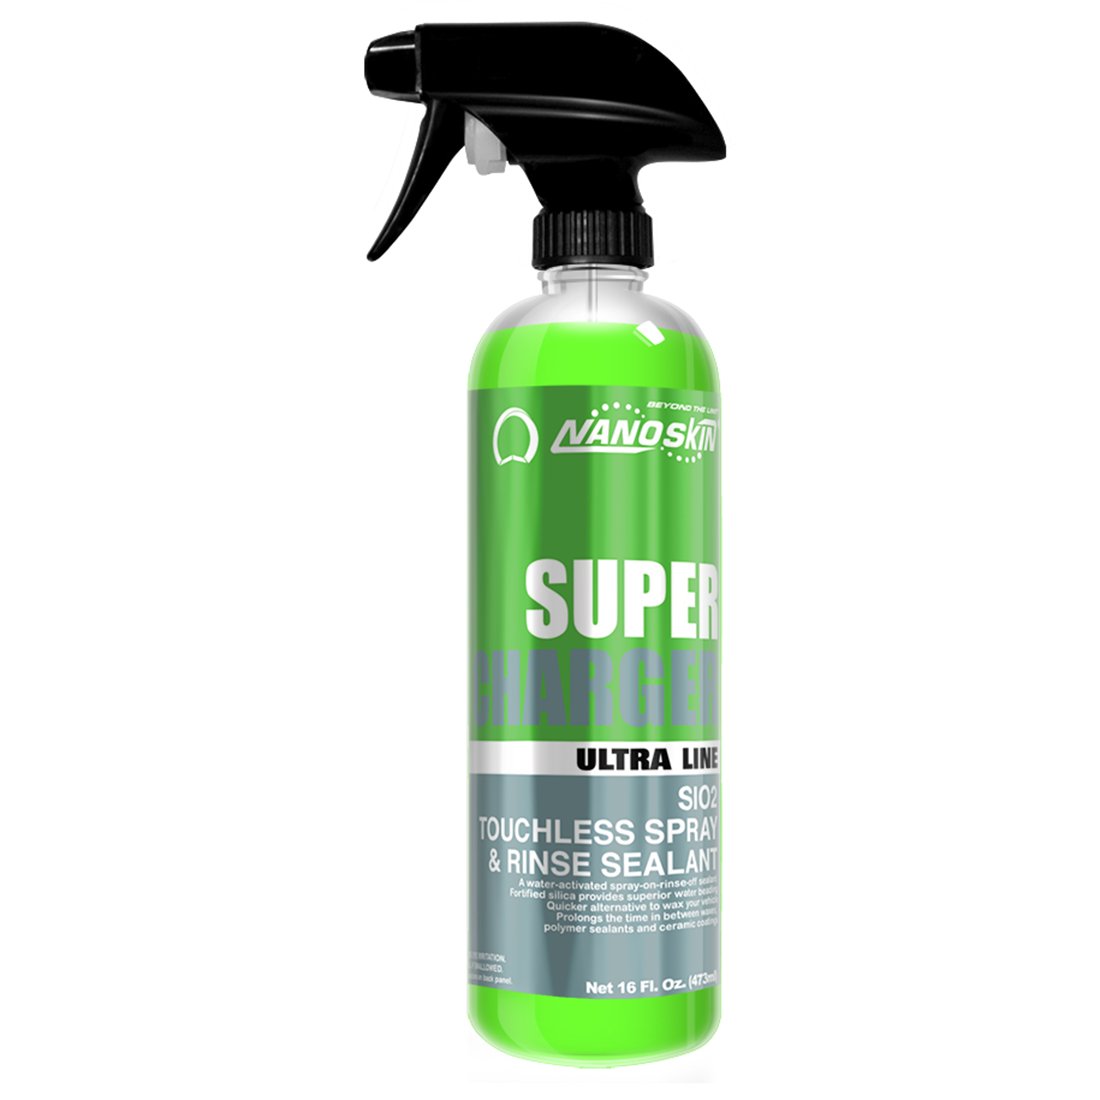 Nanoskin SUPER-CHARGER SiO2 Touchless Spray & Rinse Sealant - Detailing Connect